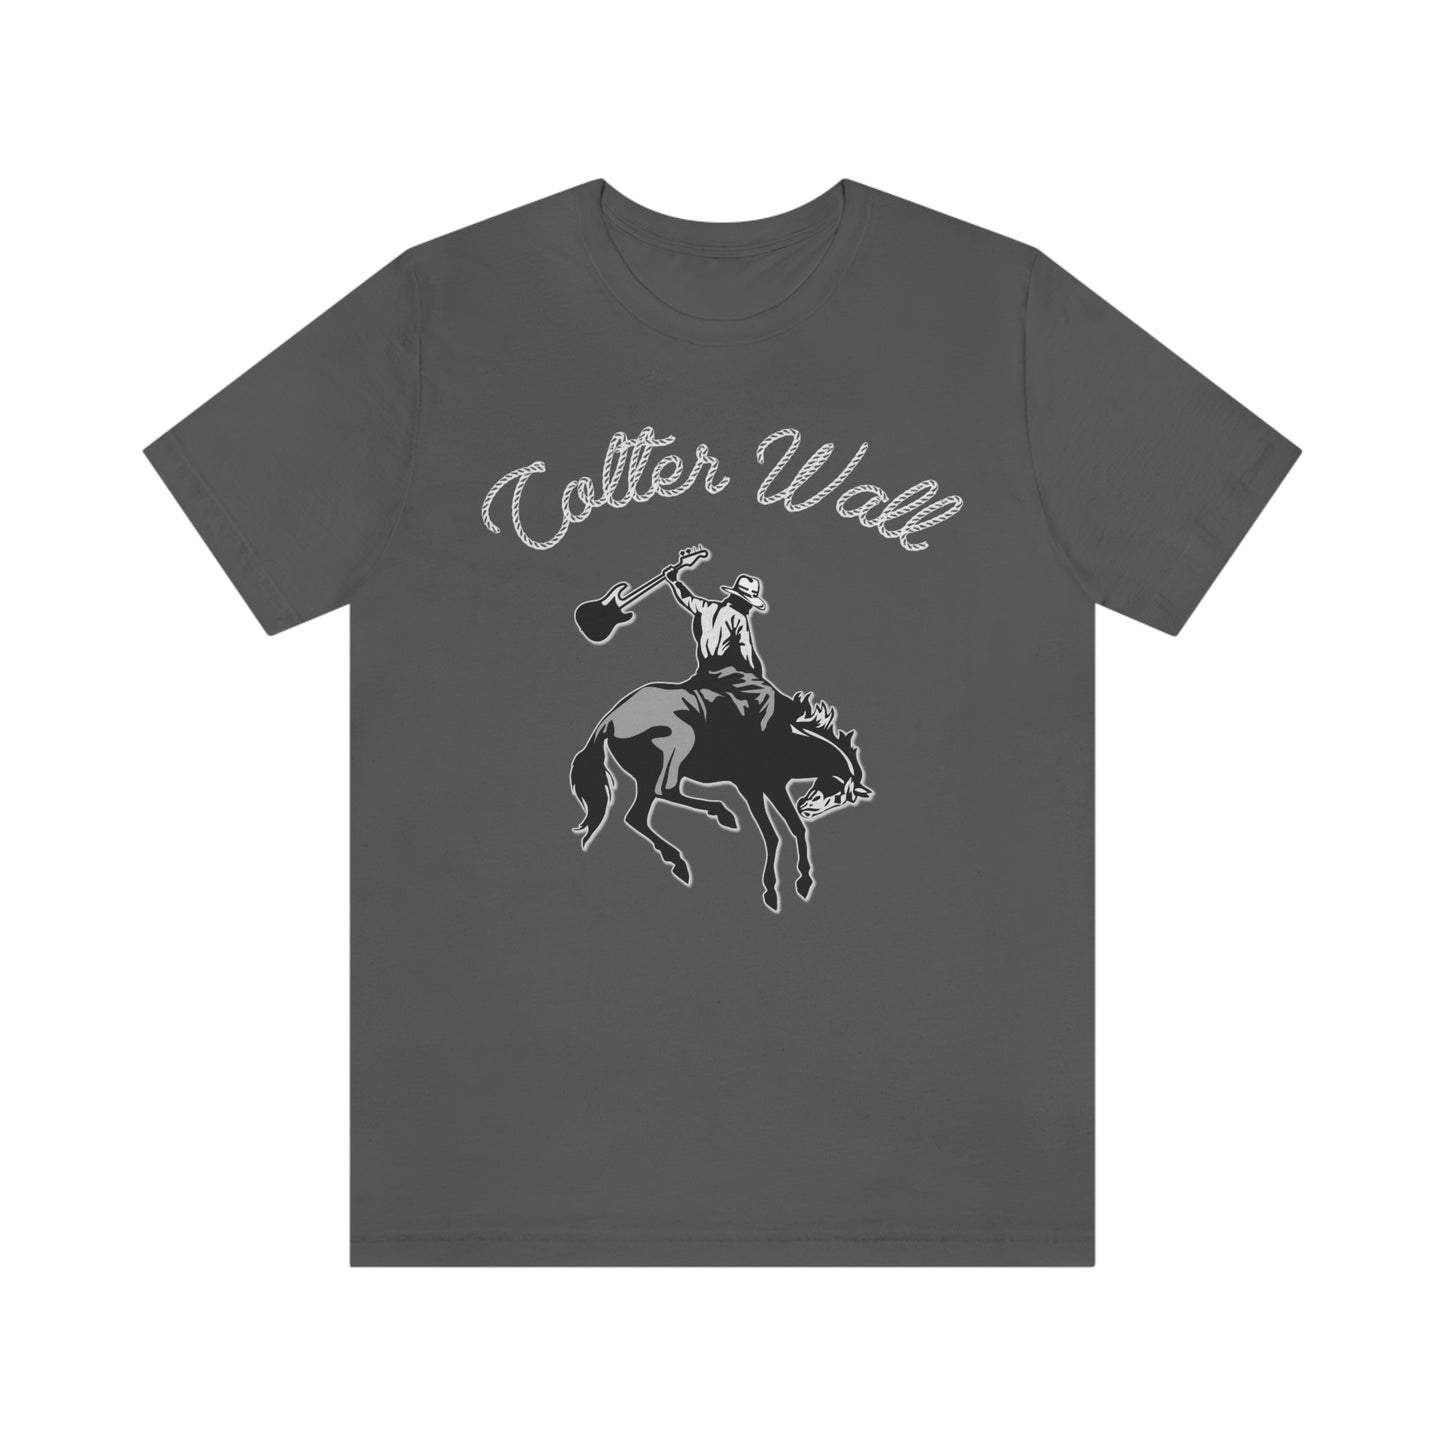 Colter Wall, Colter Wall Tshirt, Rodeo Shirt, Colter Wall Merch, Colter Wall Gift Idea, Western Tee, Country Music Tee, Western Rodeo